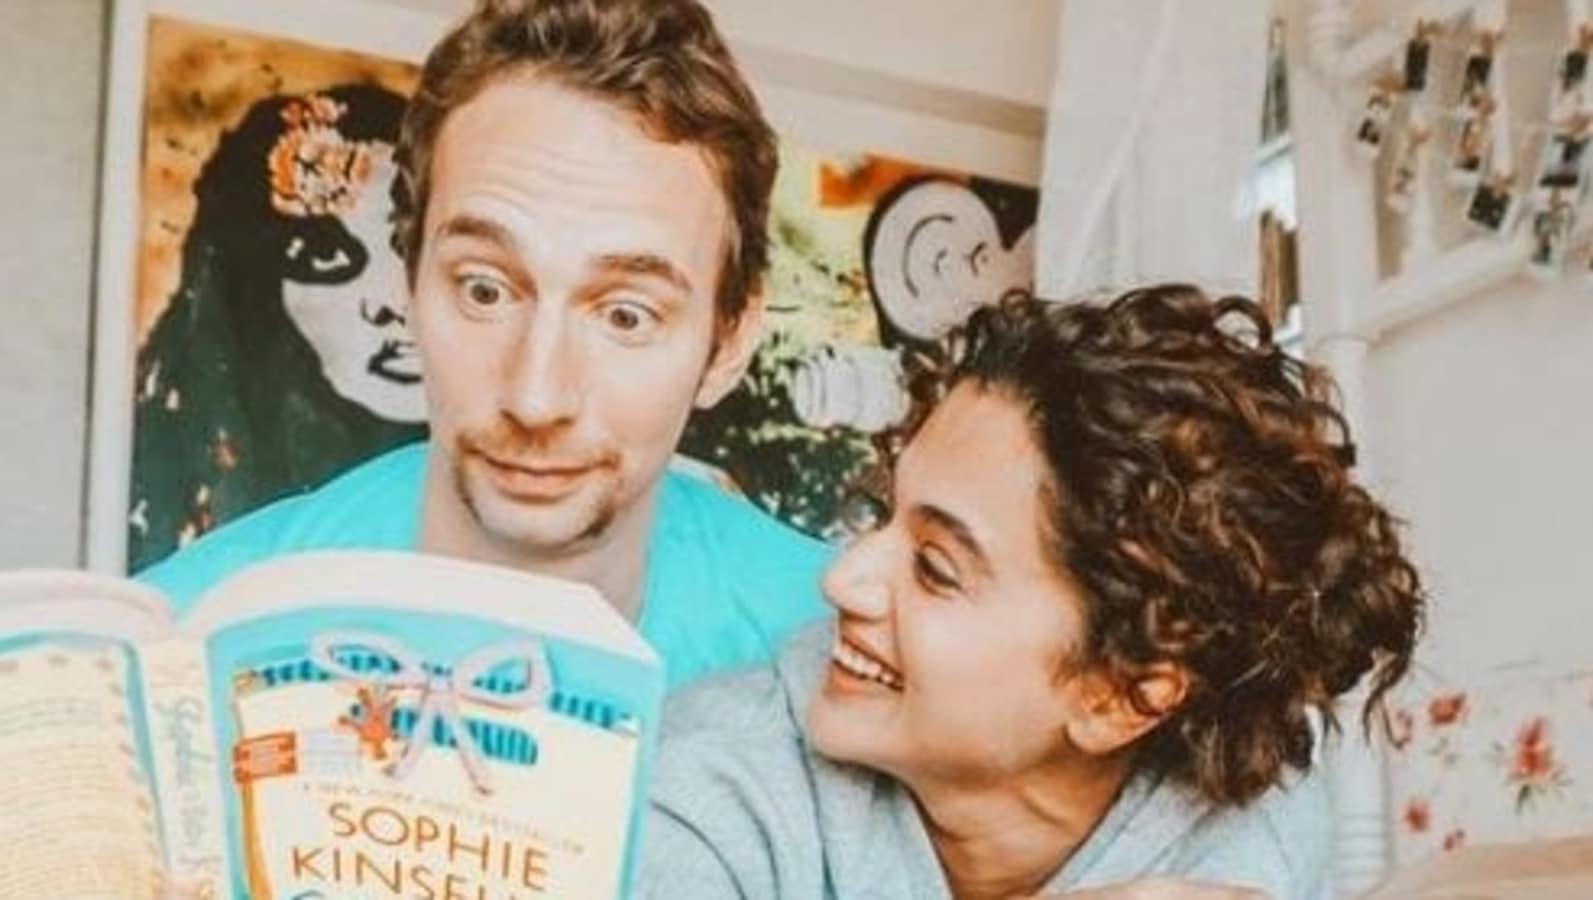 Taapsee Pannu is proud of badminton coach-boyfriend Mathias Boe after India’s historic Thomas Cup win